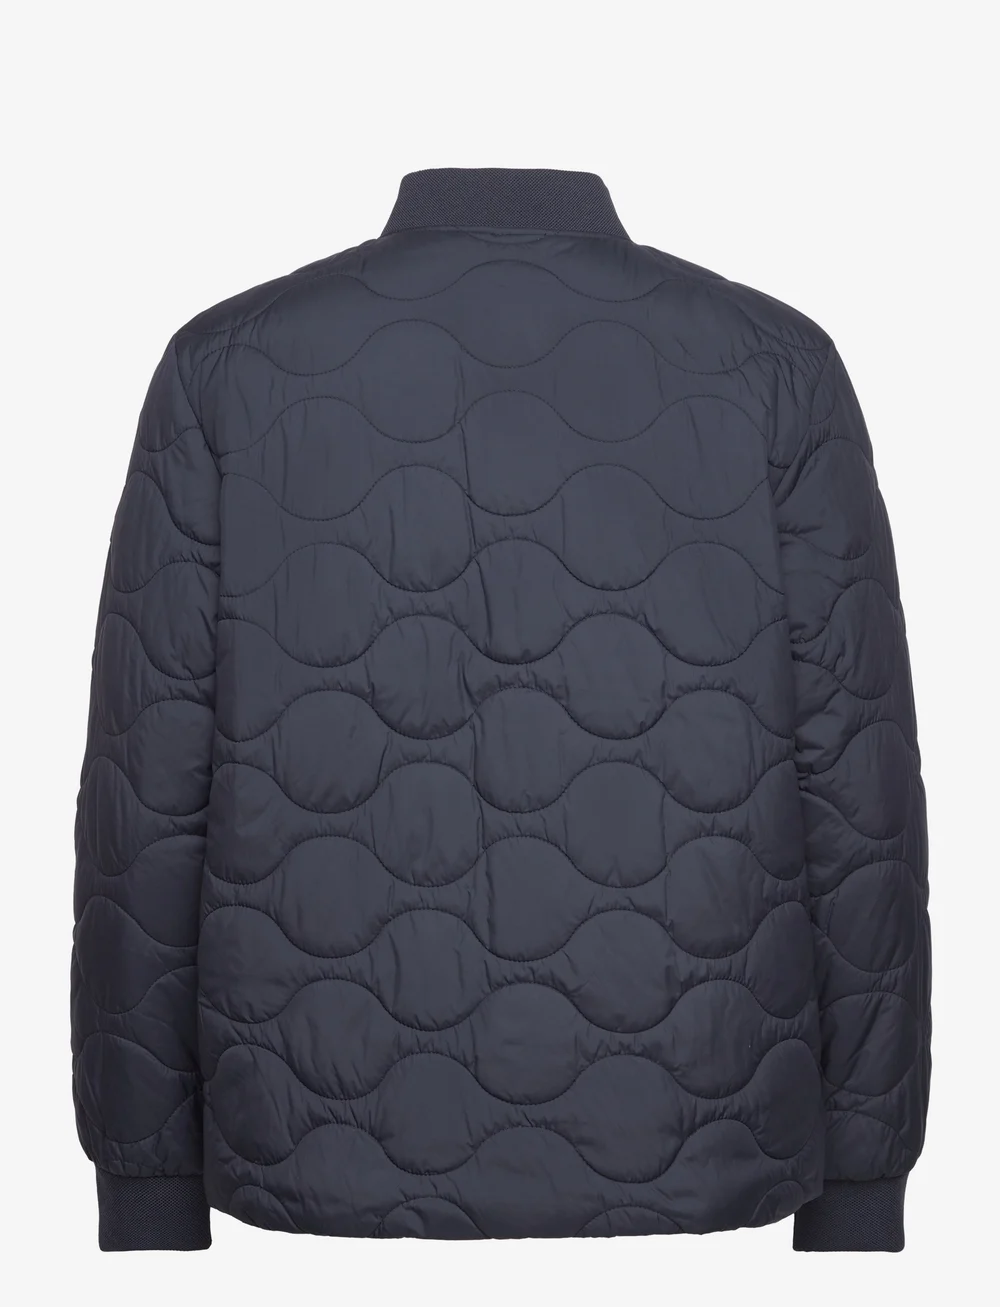 Tom Tailor Padded Shirt - 50.00 €. Buy Padded jackets from Tom Tailor  online at Boozt.com. Fast delivery and easy returns